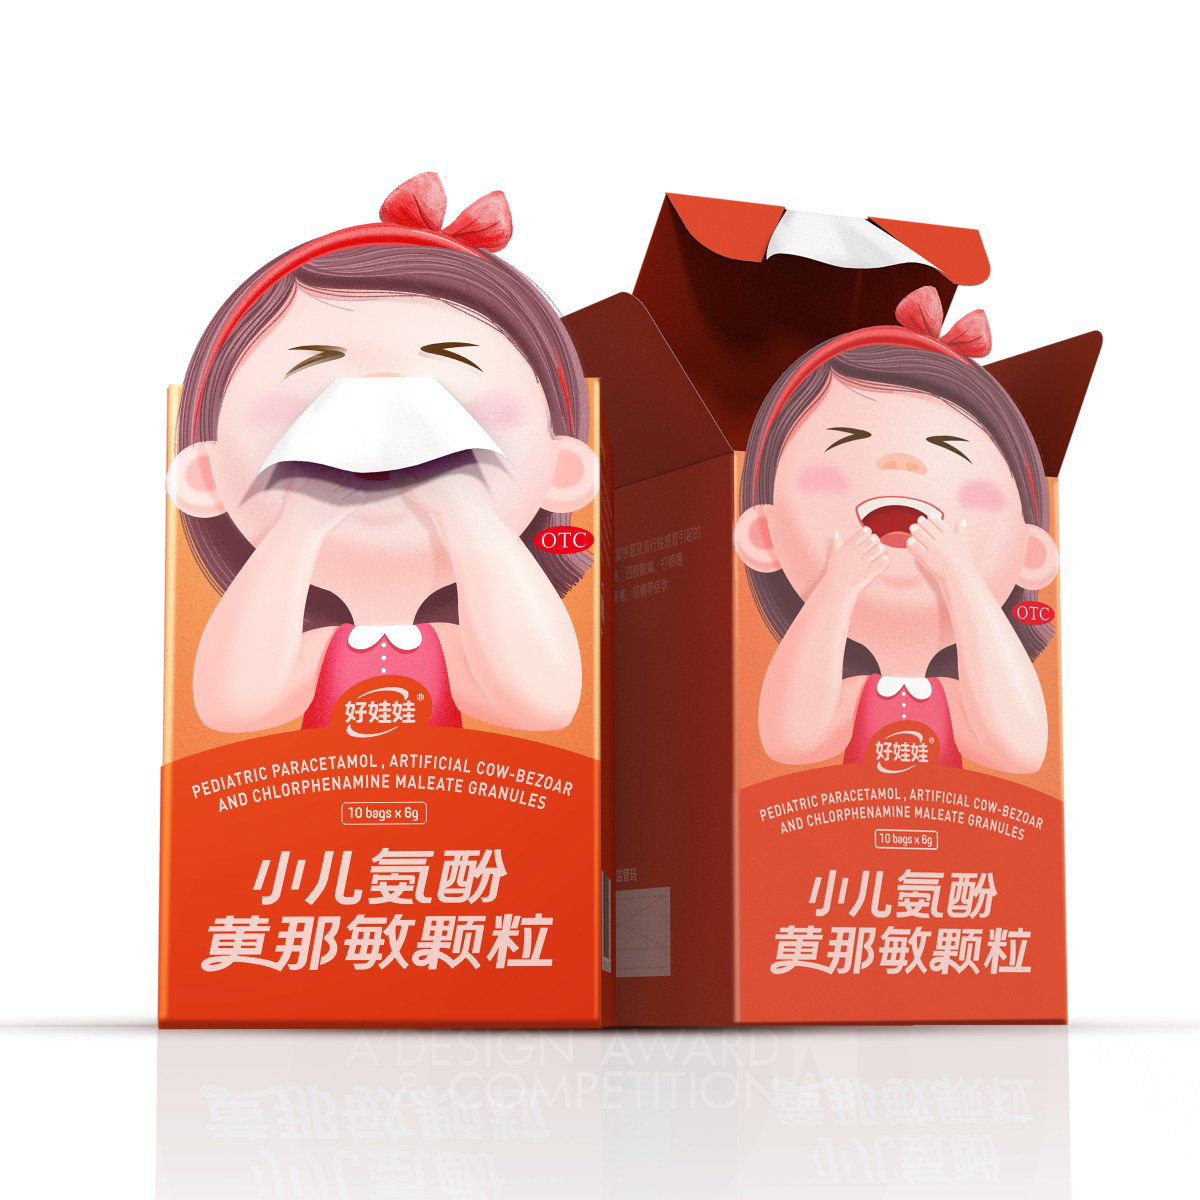 Tissue Box Children Medicine Packaging by Fuxi Lab of CR999